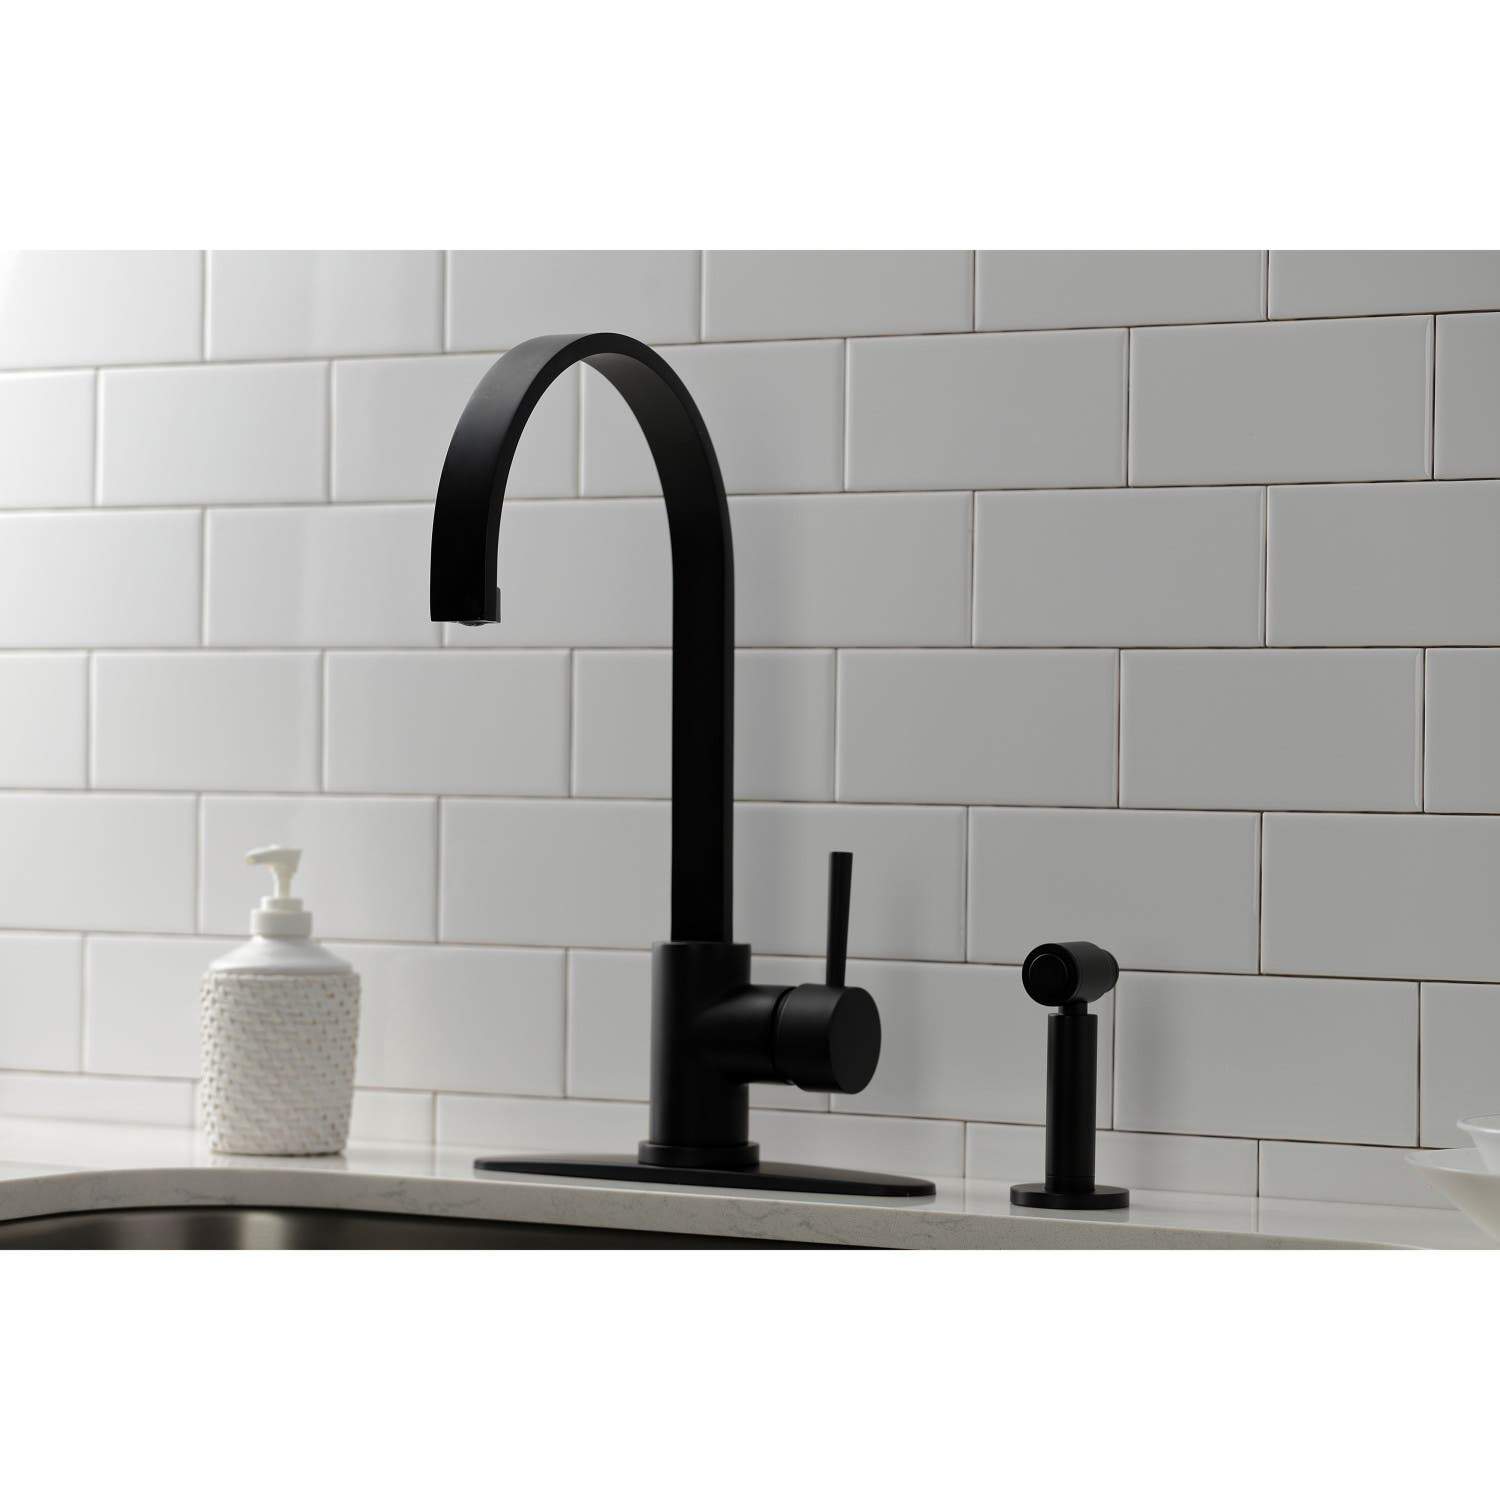 Kingston Brass LS871XDLBS-P Concord Single-Handle Kitchen Faucet with Brass Sprayer